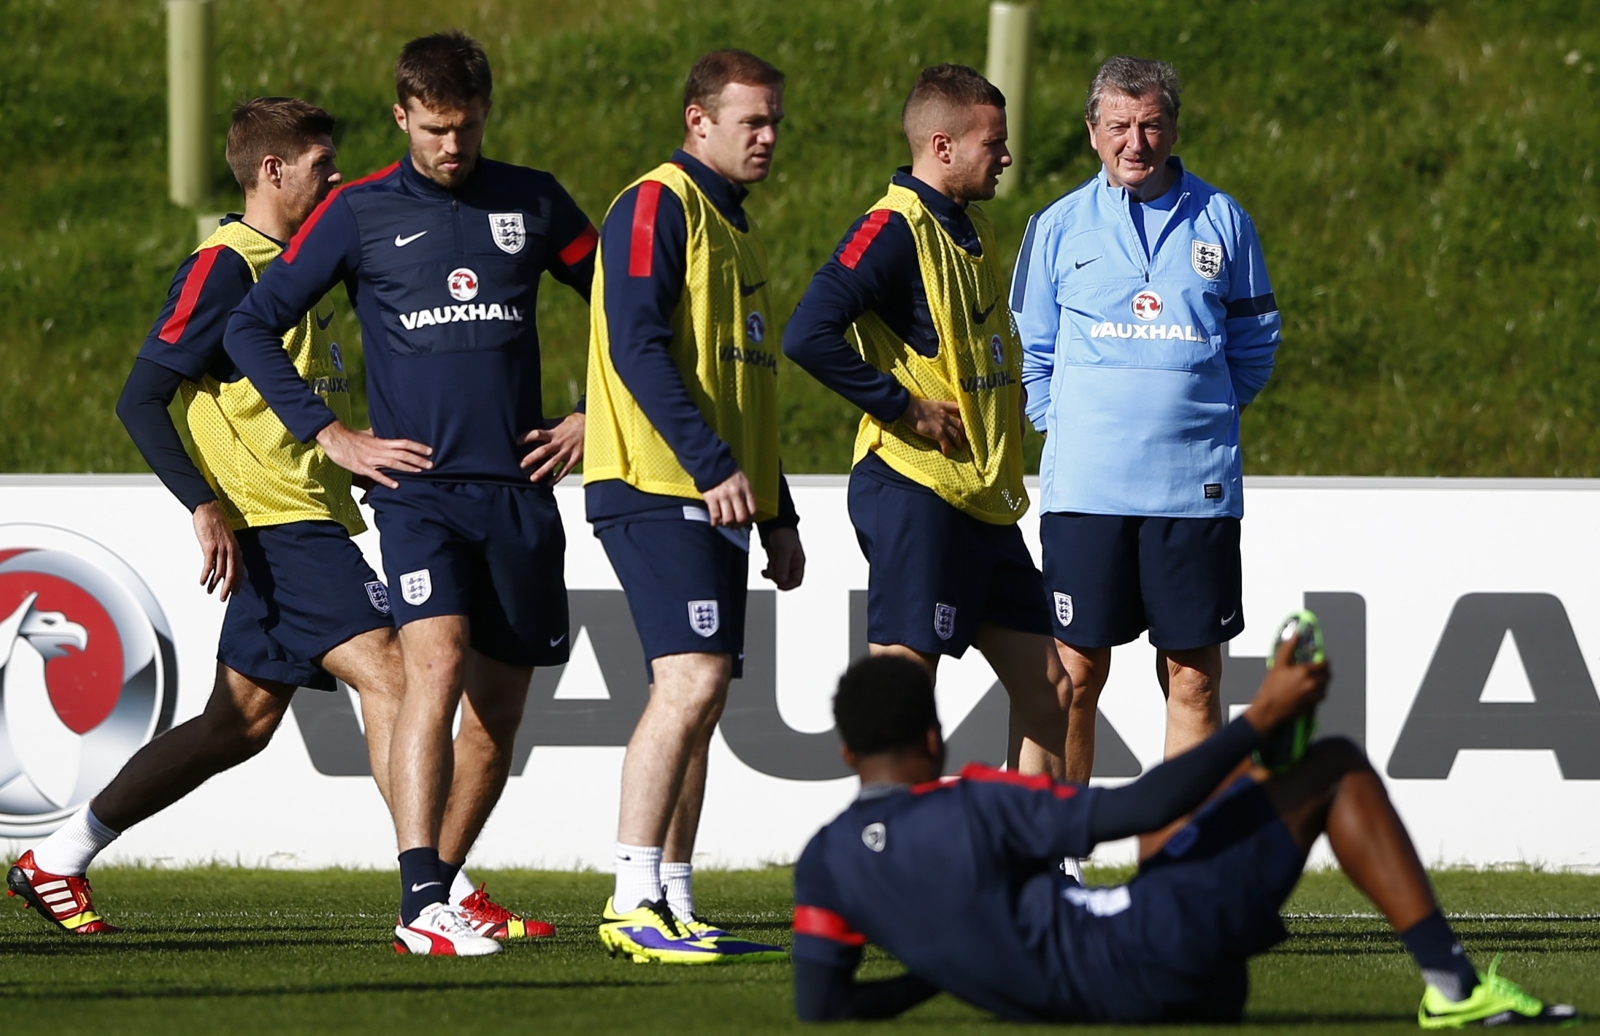 Roy Hodgson watches a training session ahead of their 2014 World Cup qualifying match against Montenegro at St George's Park, Burton upon Trent, Staffordshire. Photo: Reuters